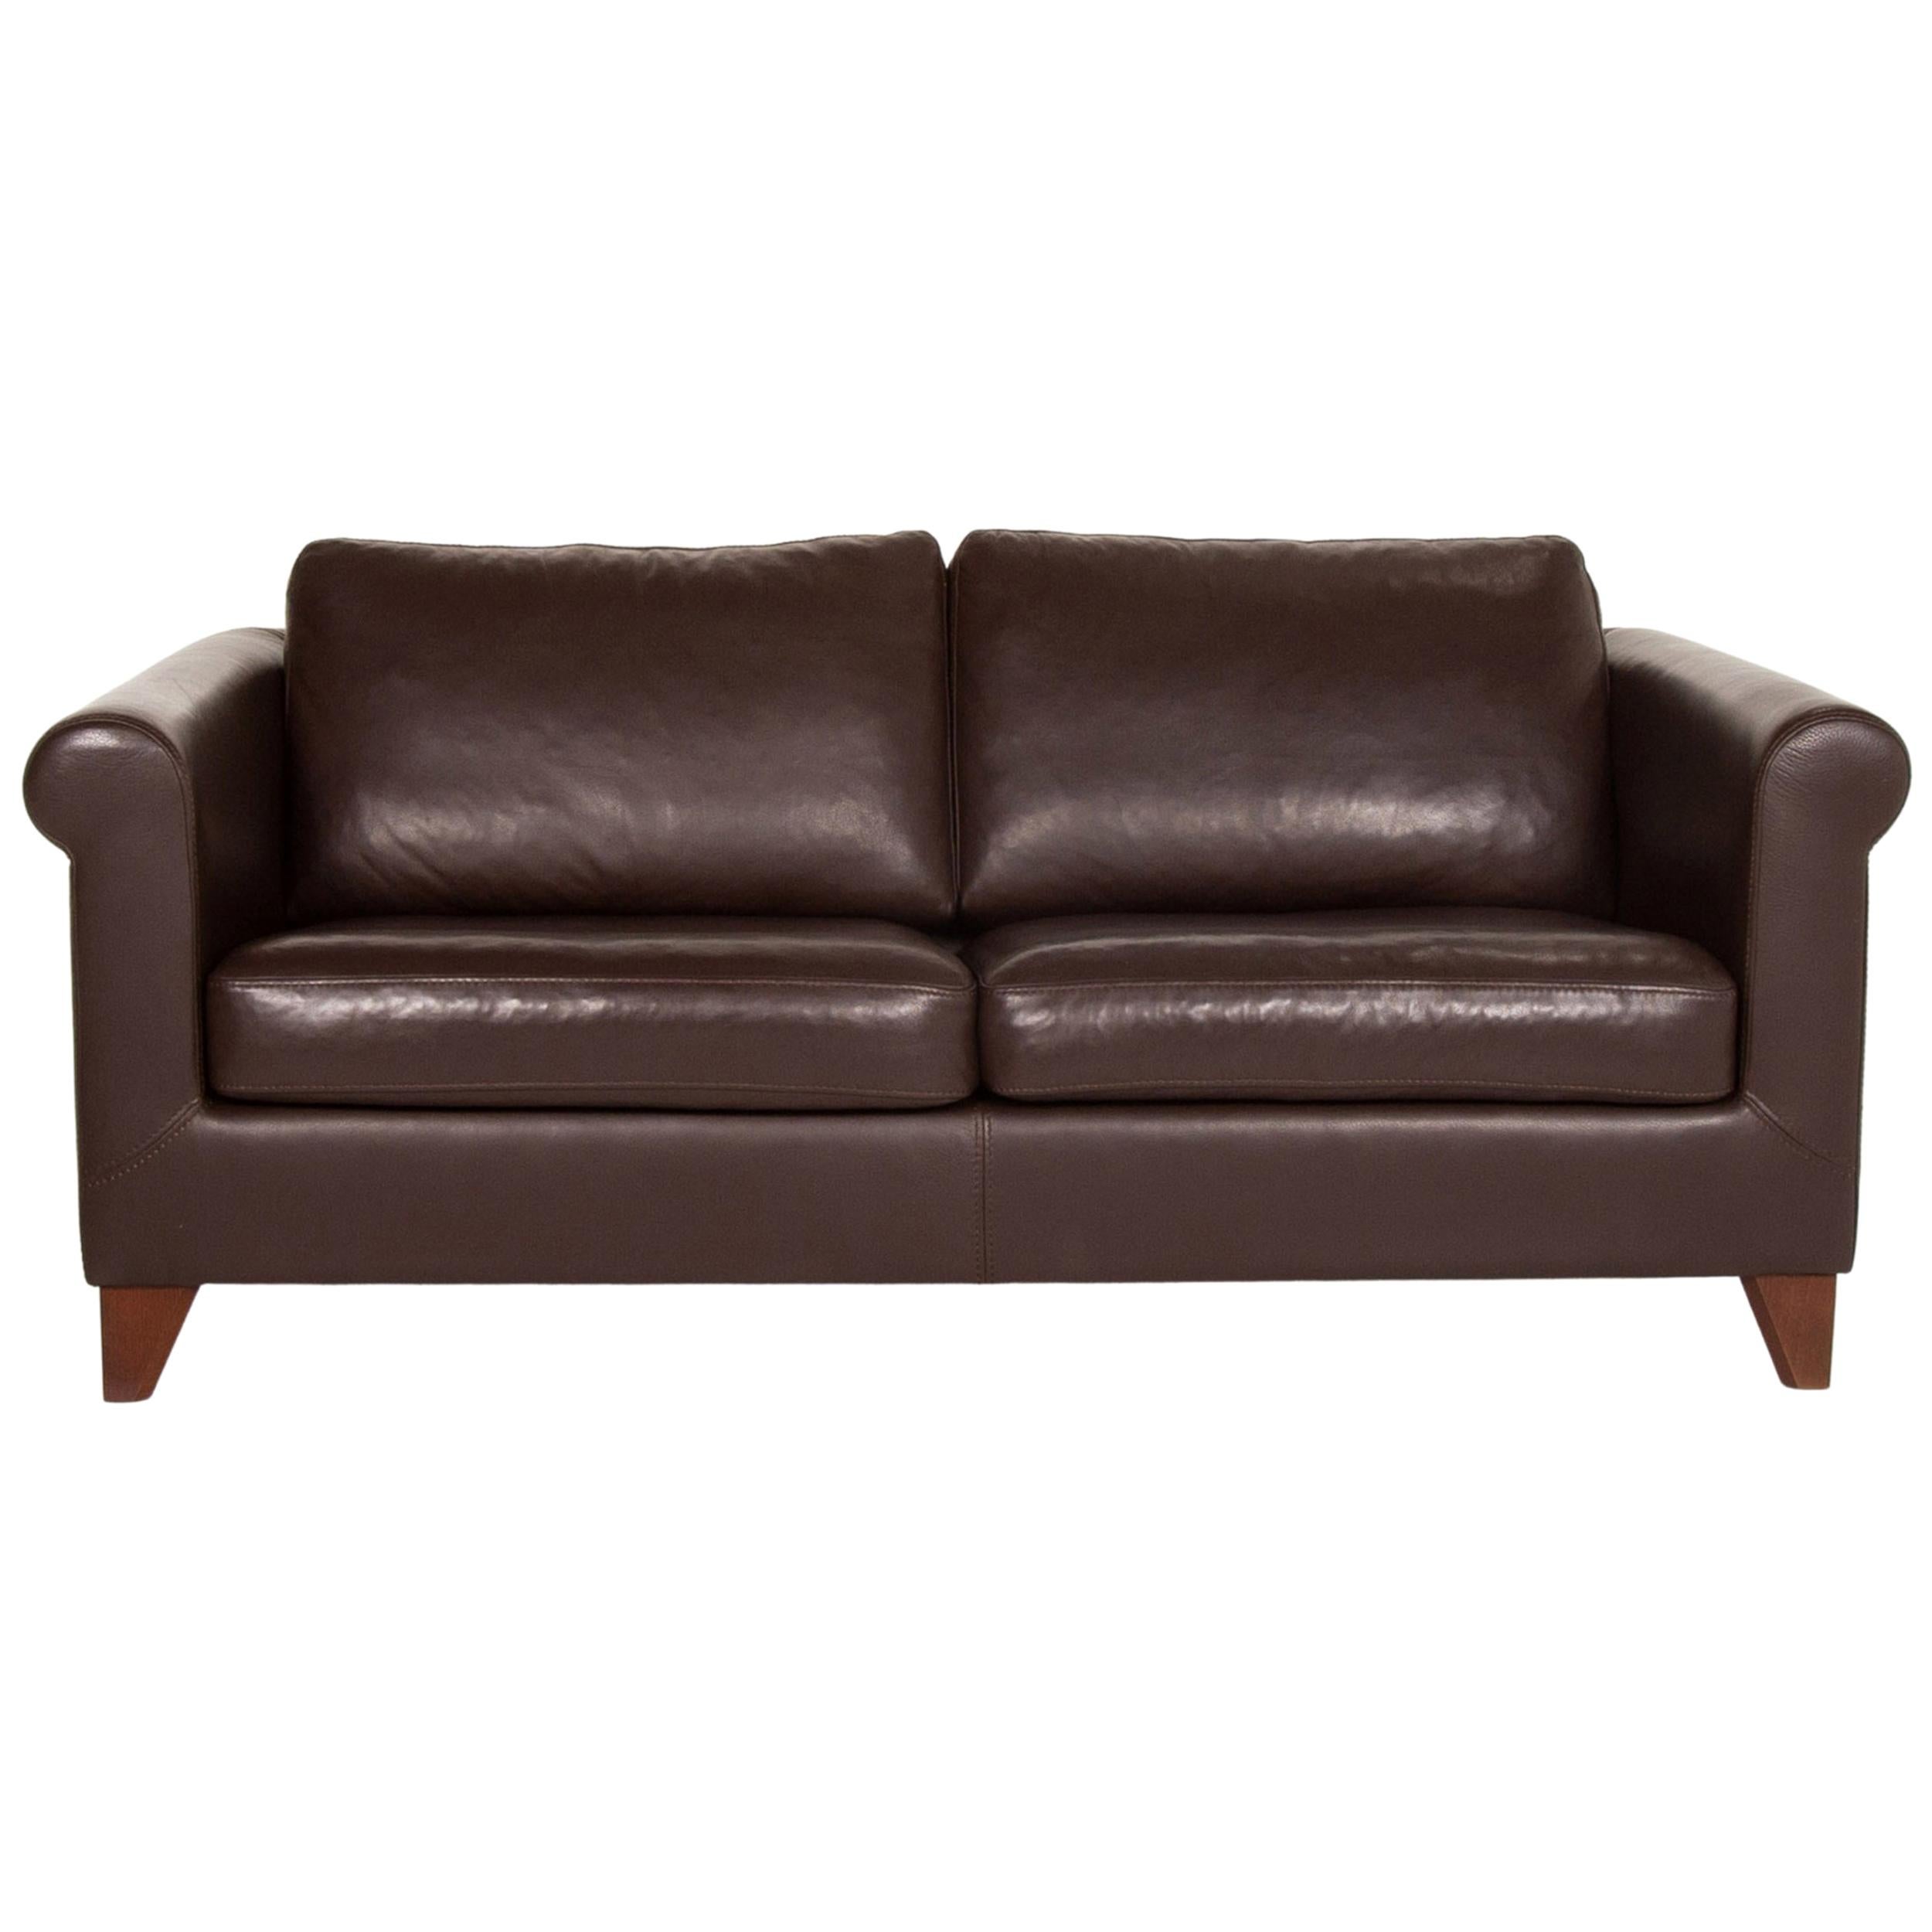 Machalke Amadeo Leather Sofa Dark Brown Brown Three-Seat Couch For Sale